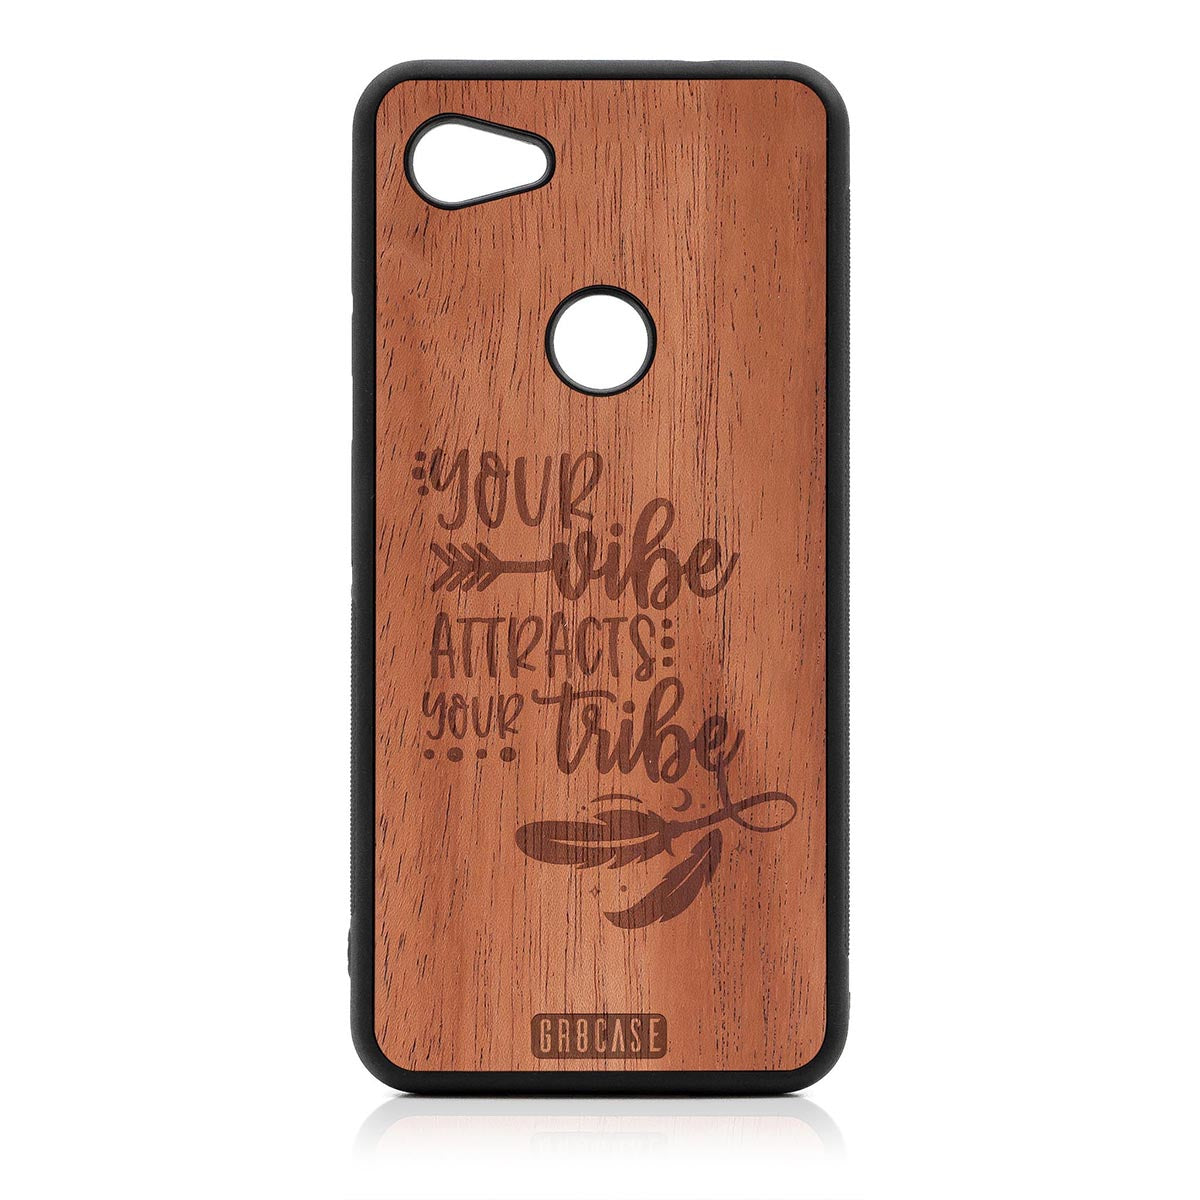 Your Vibe Attracts Your Tribe Design Wood Case Google Pixel 3A